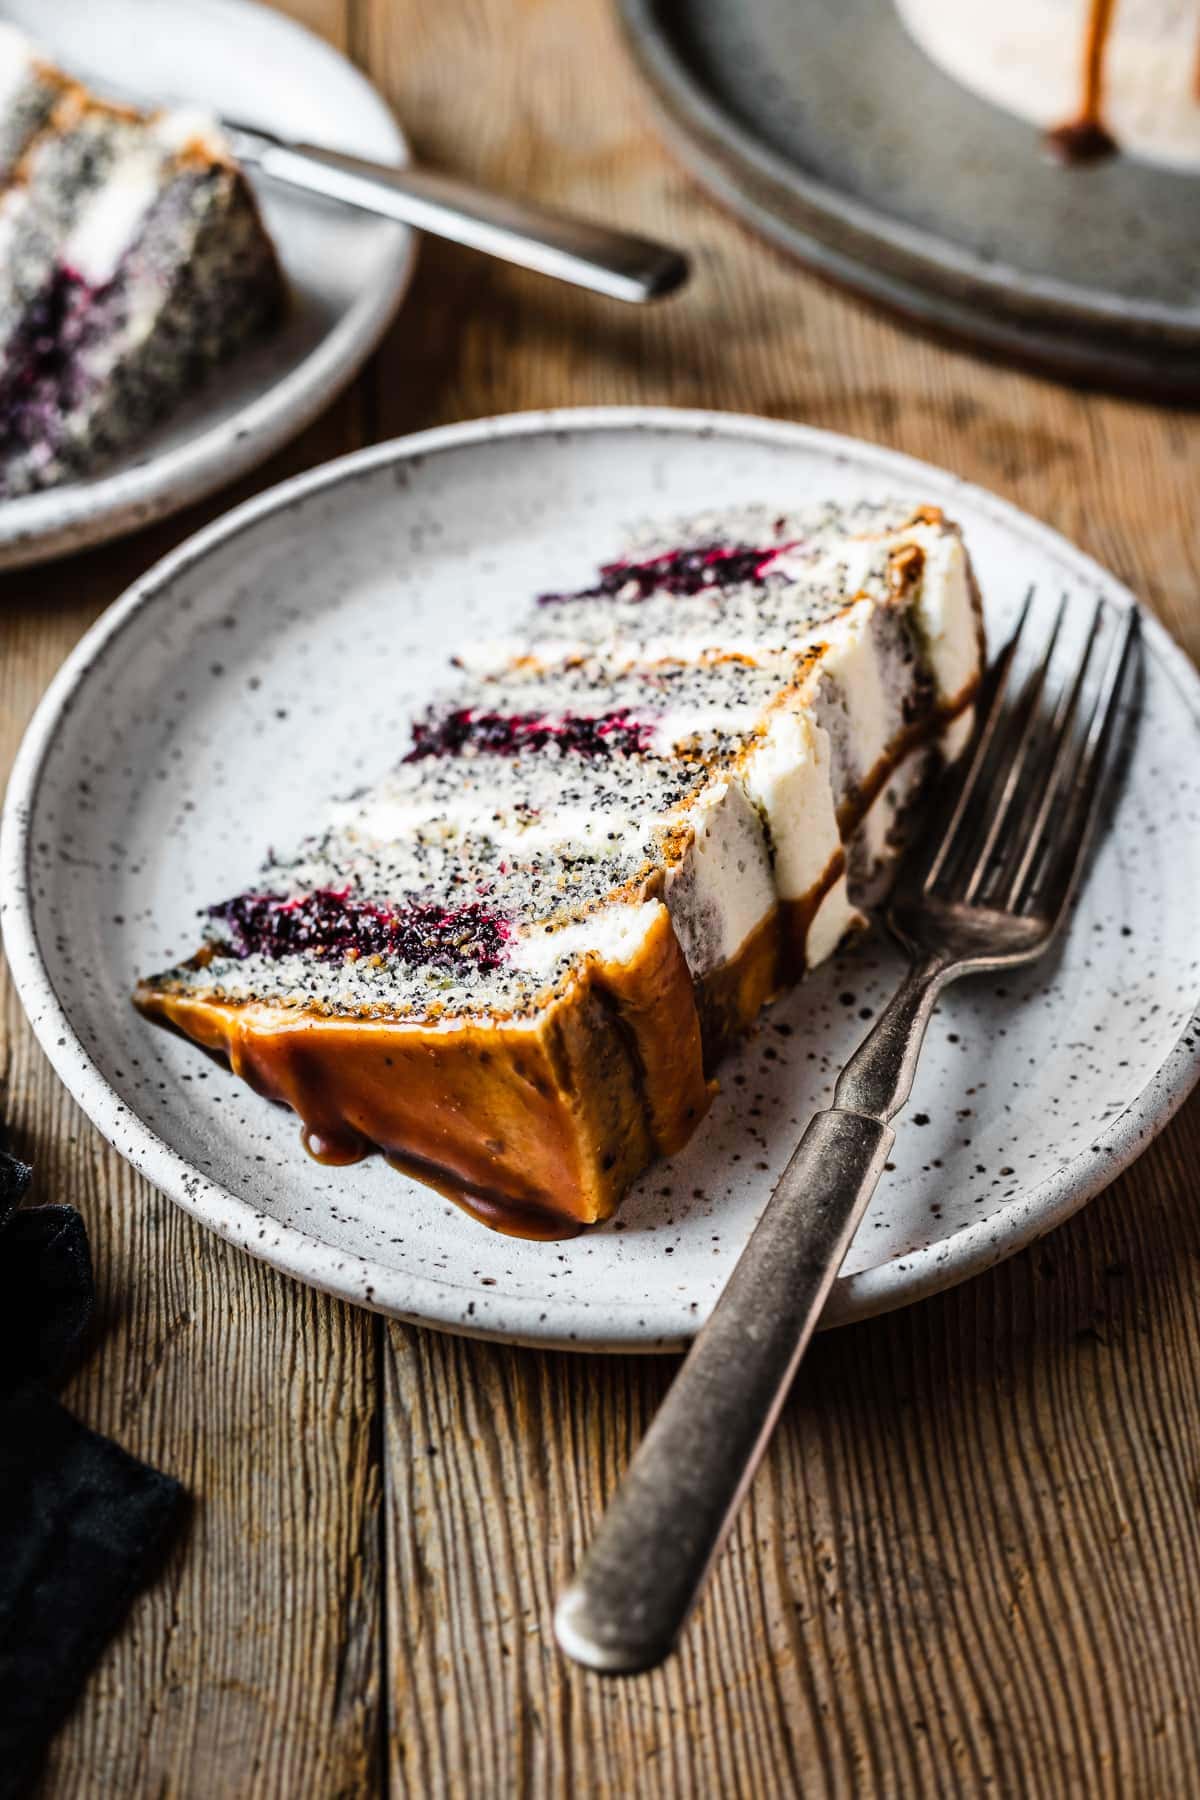 A slice of poppyseed cake with mascarpone frosting and caramel drip, with layers of vibrant purple blackberry basil jam. The slice sits on a white speckled ceramic plate on a rustic wooden table.